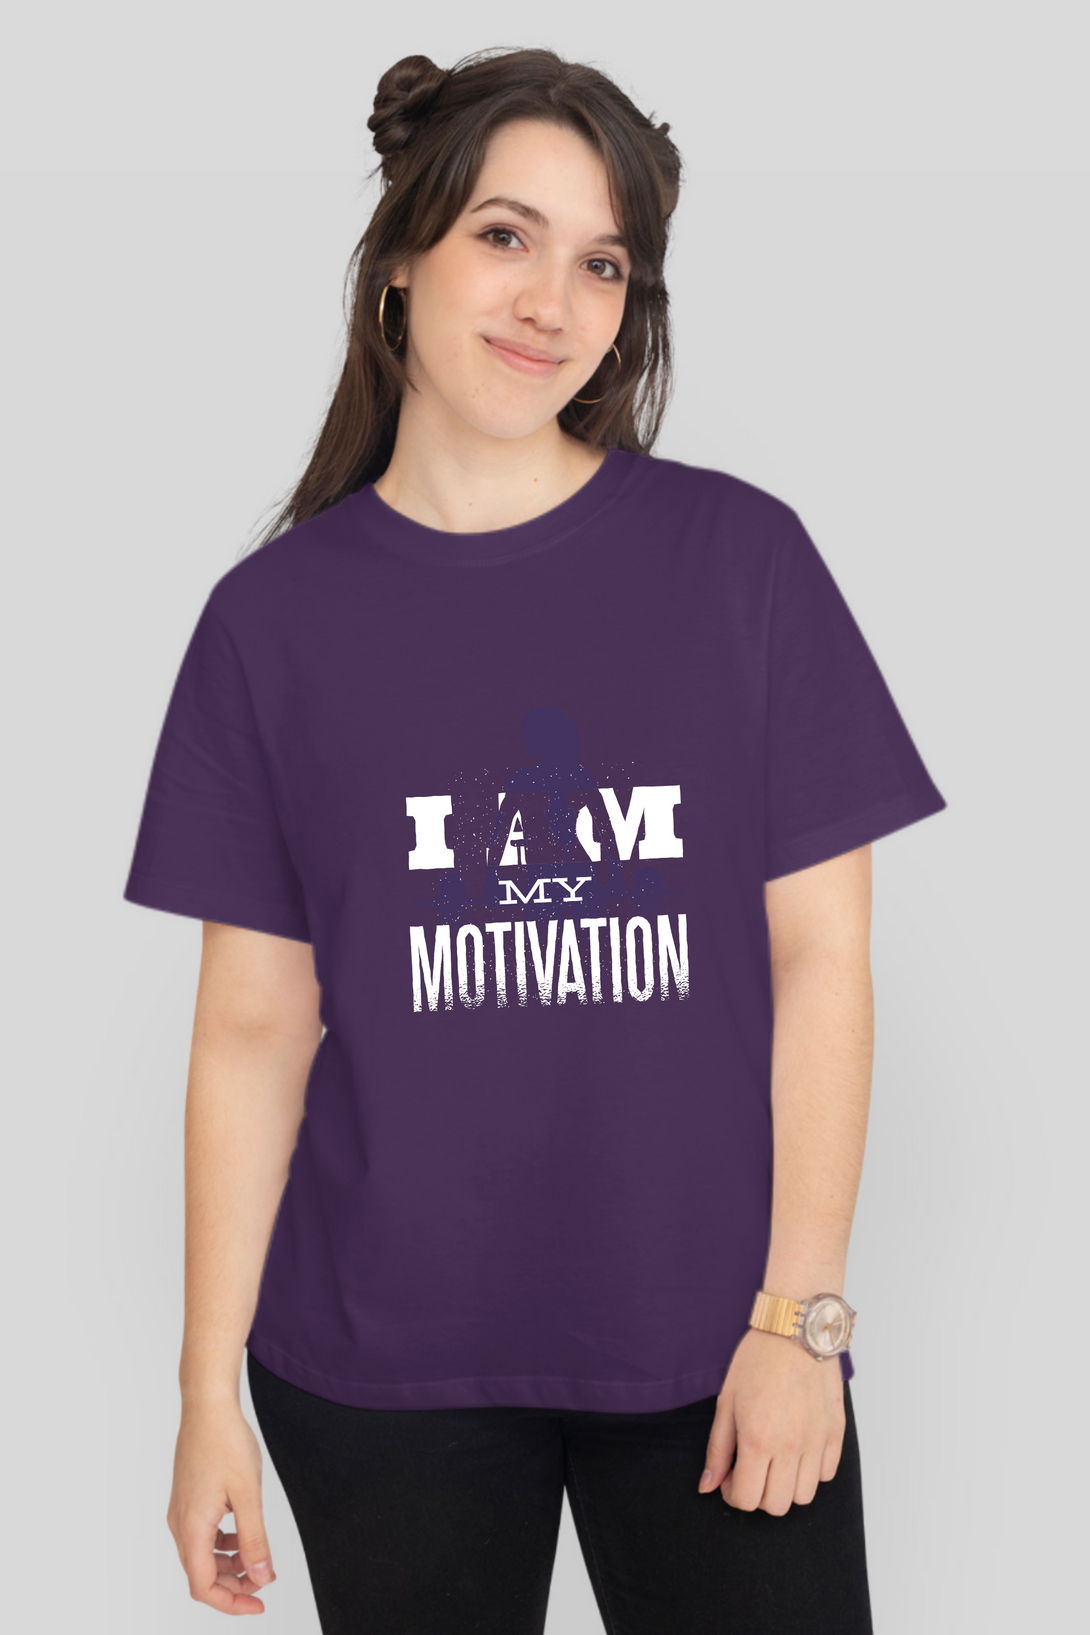 I Am My Motivation Printed T-Shirt For Women - WowWaves - 7